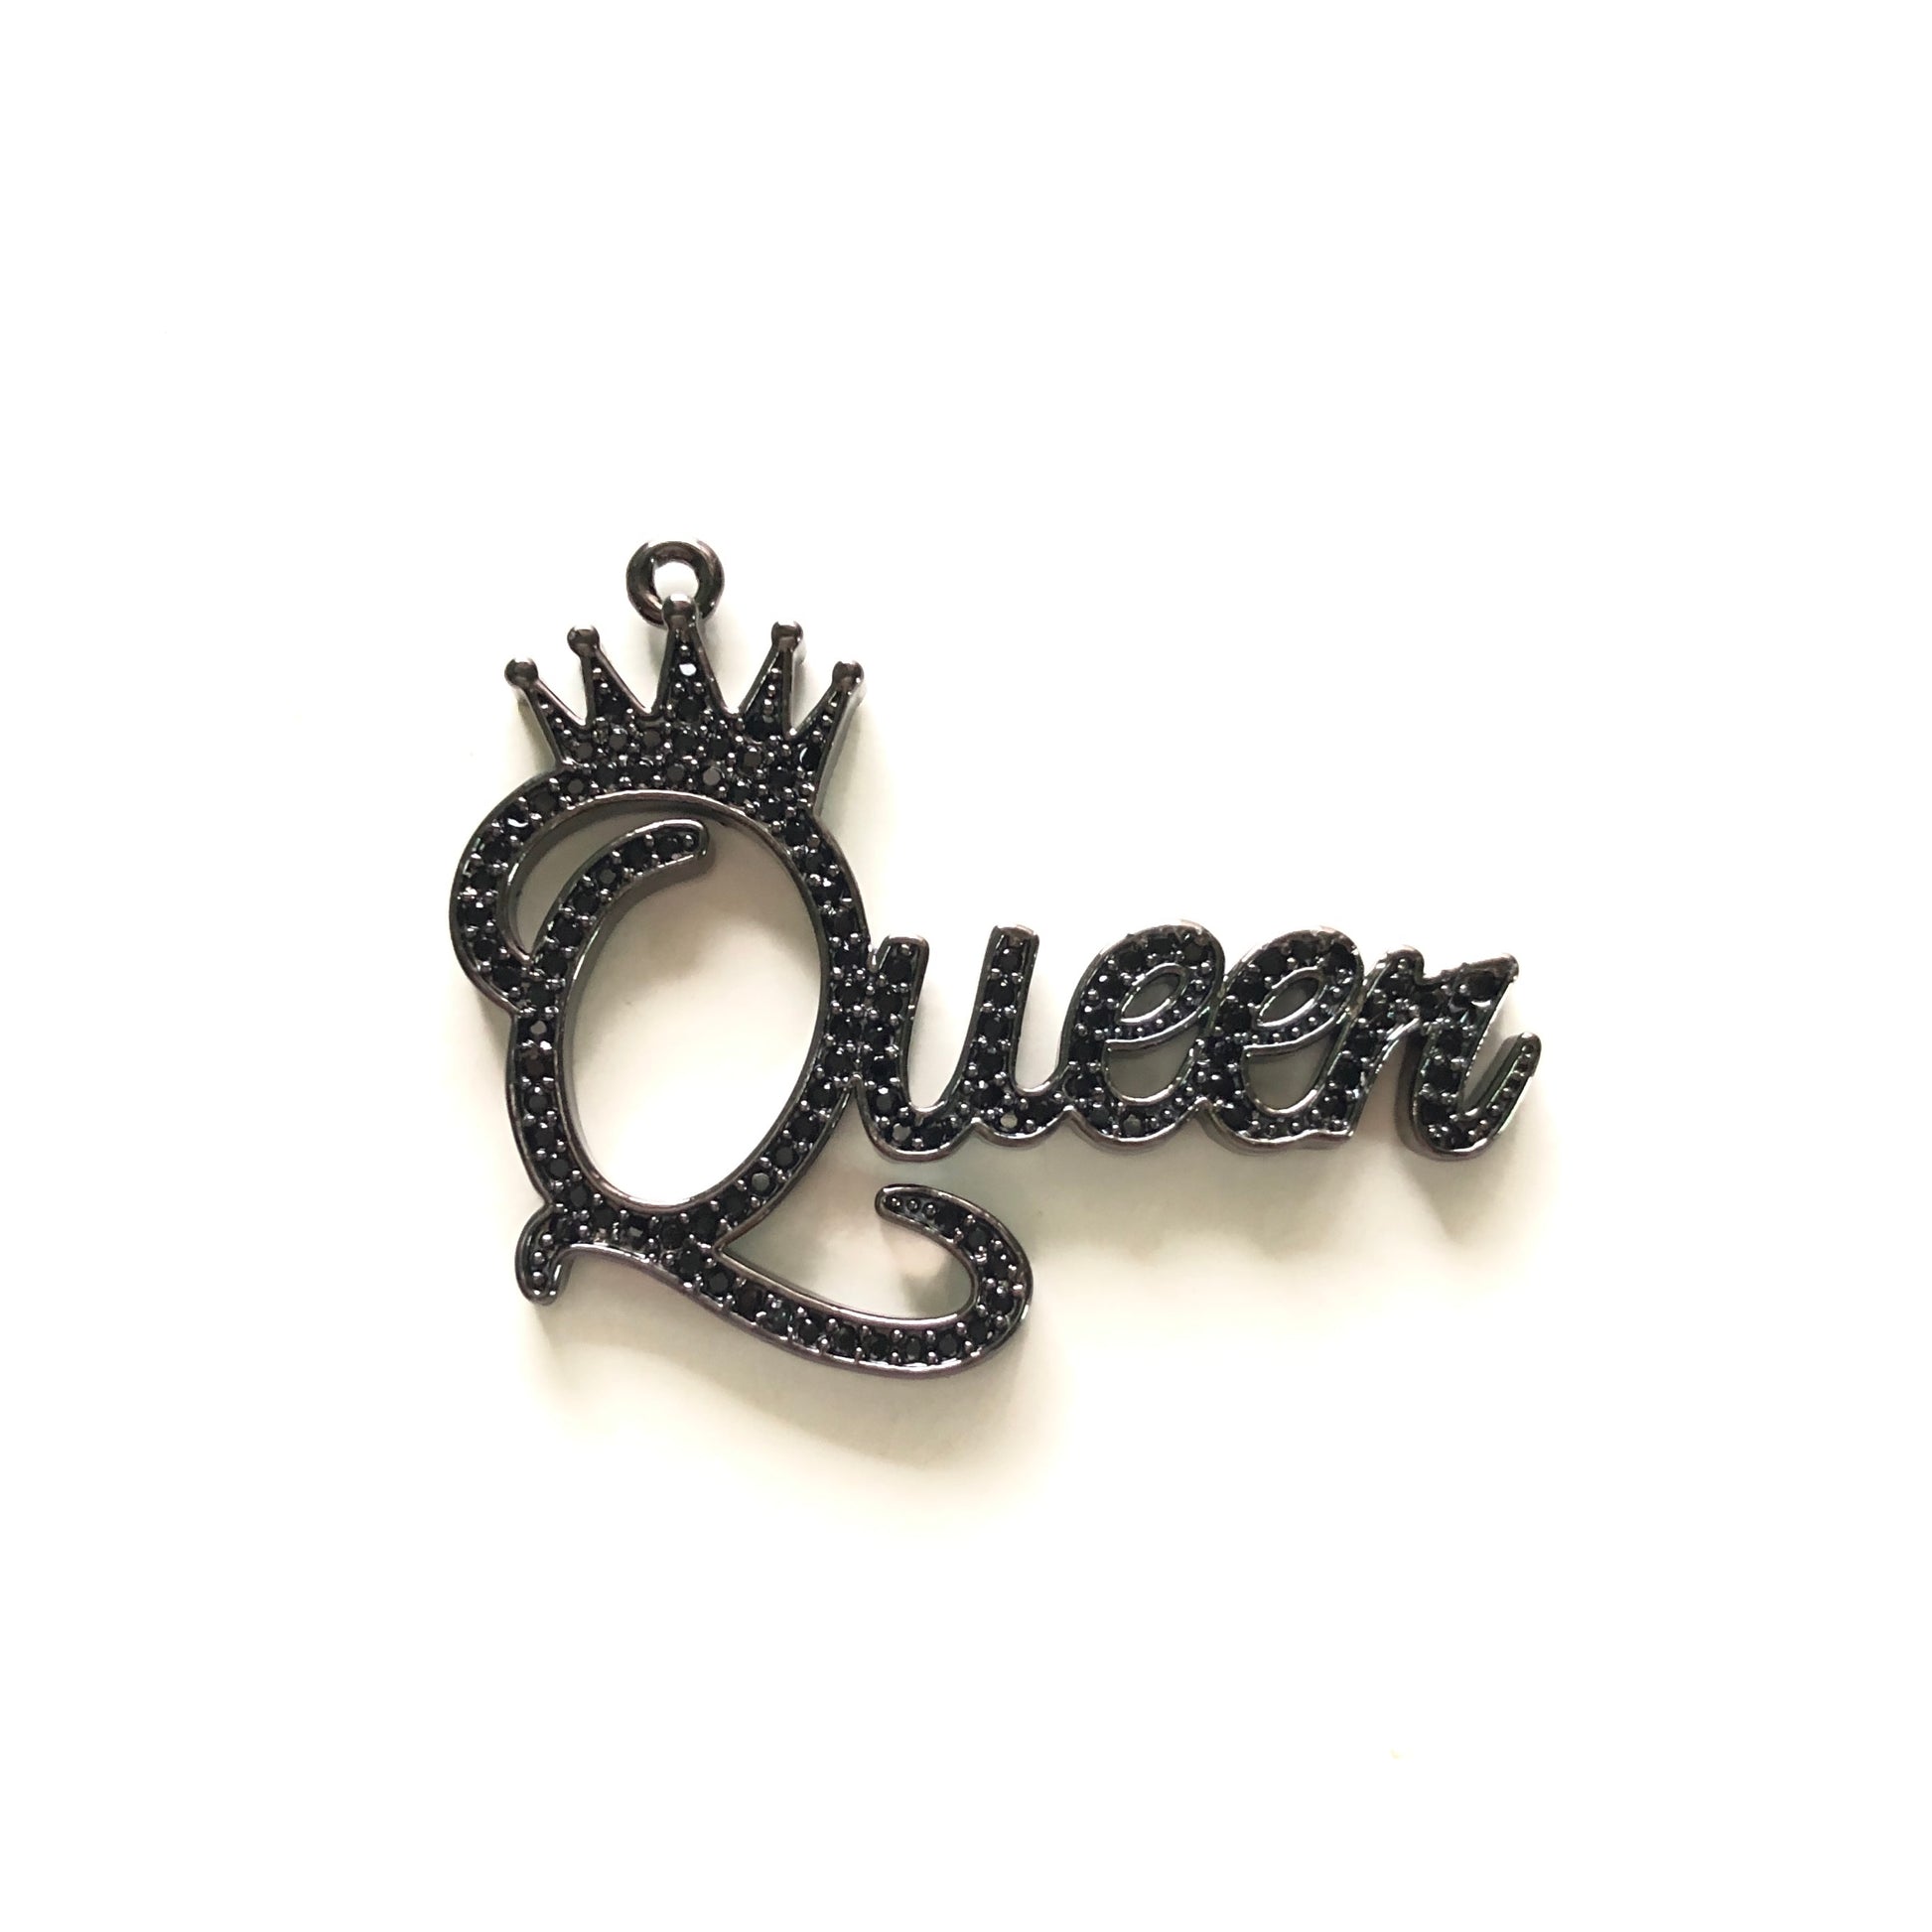 10pcs/lot 39*30mm CZ Paved Crown Queen Word Charms Black on Black CZ Paved Charms Crowns Queen Charms Words & Quotes Charms Beads Beyond